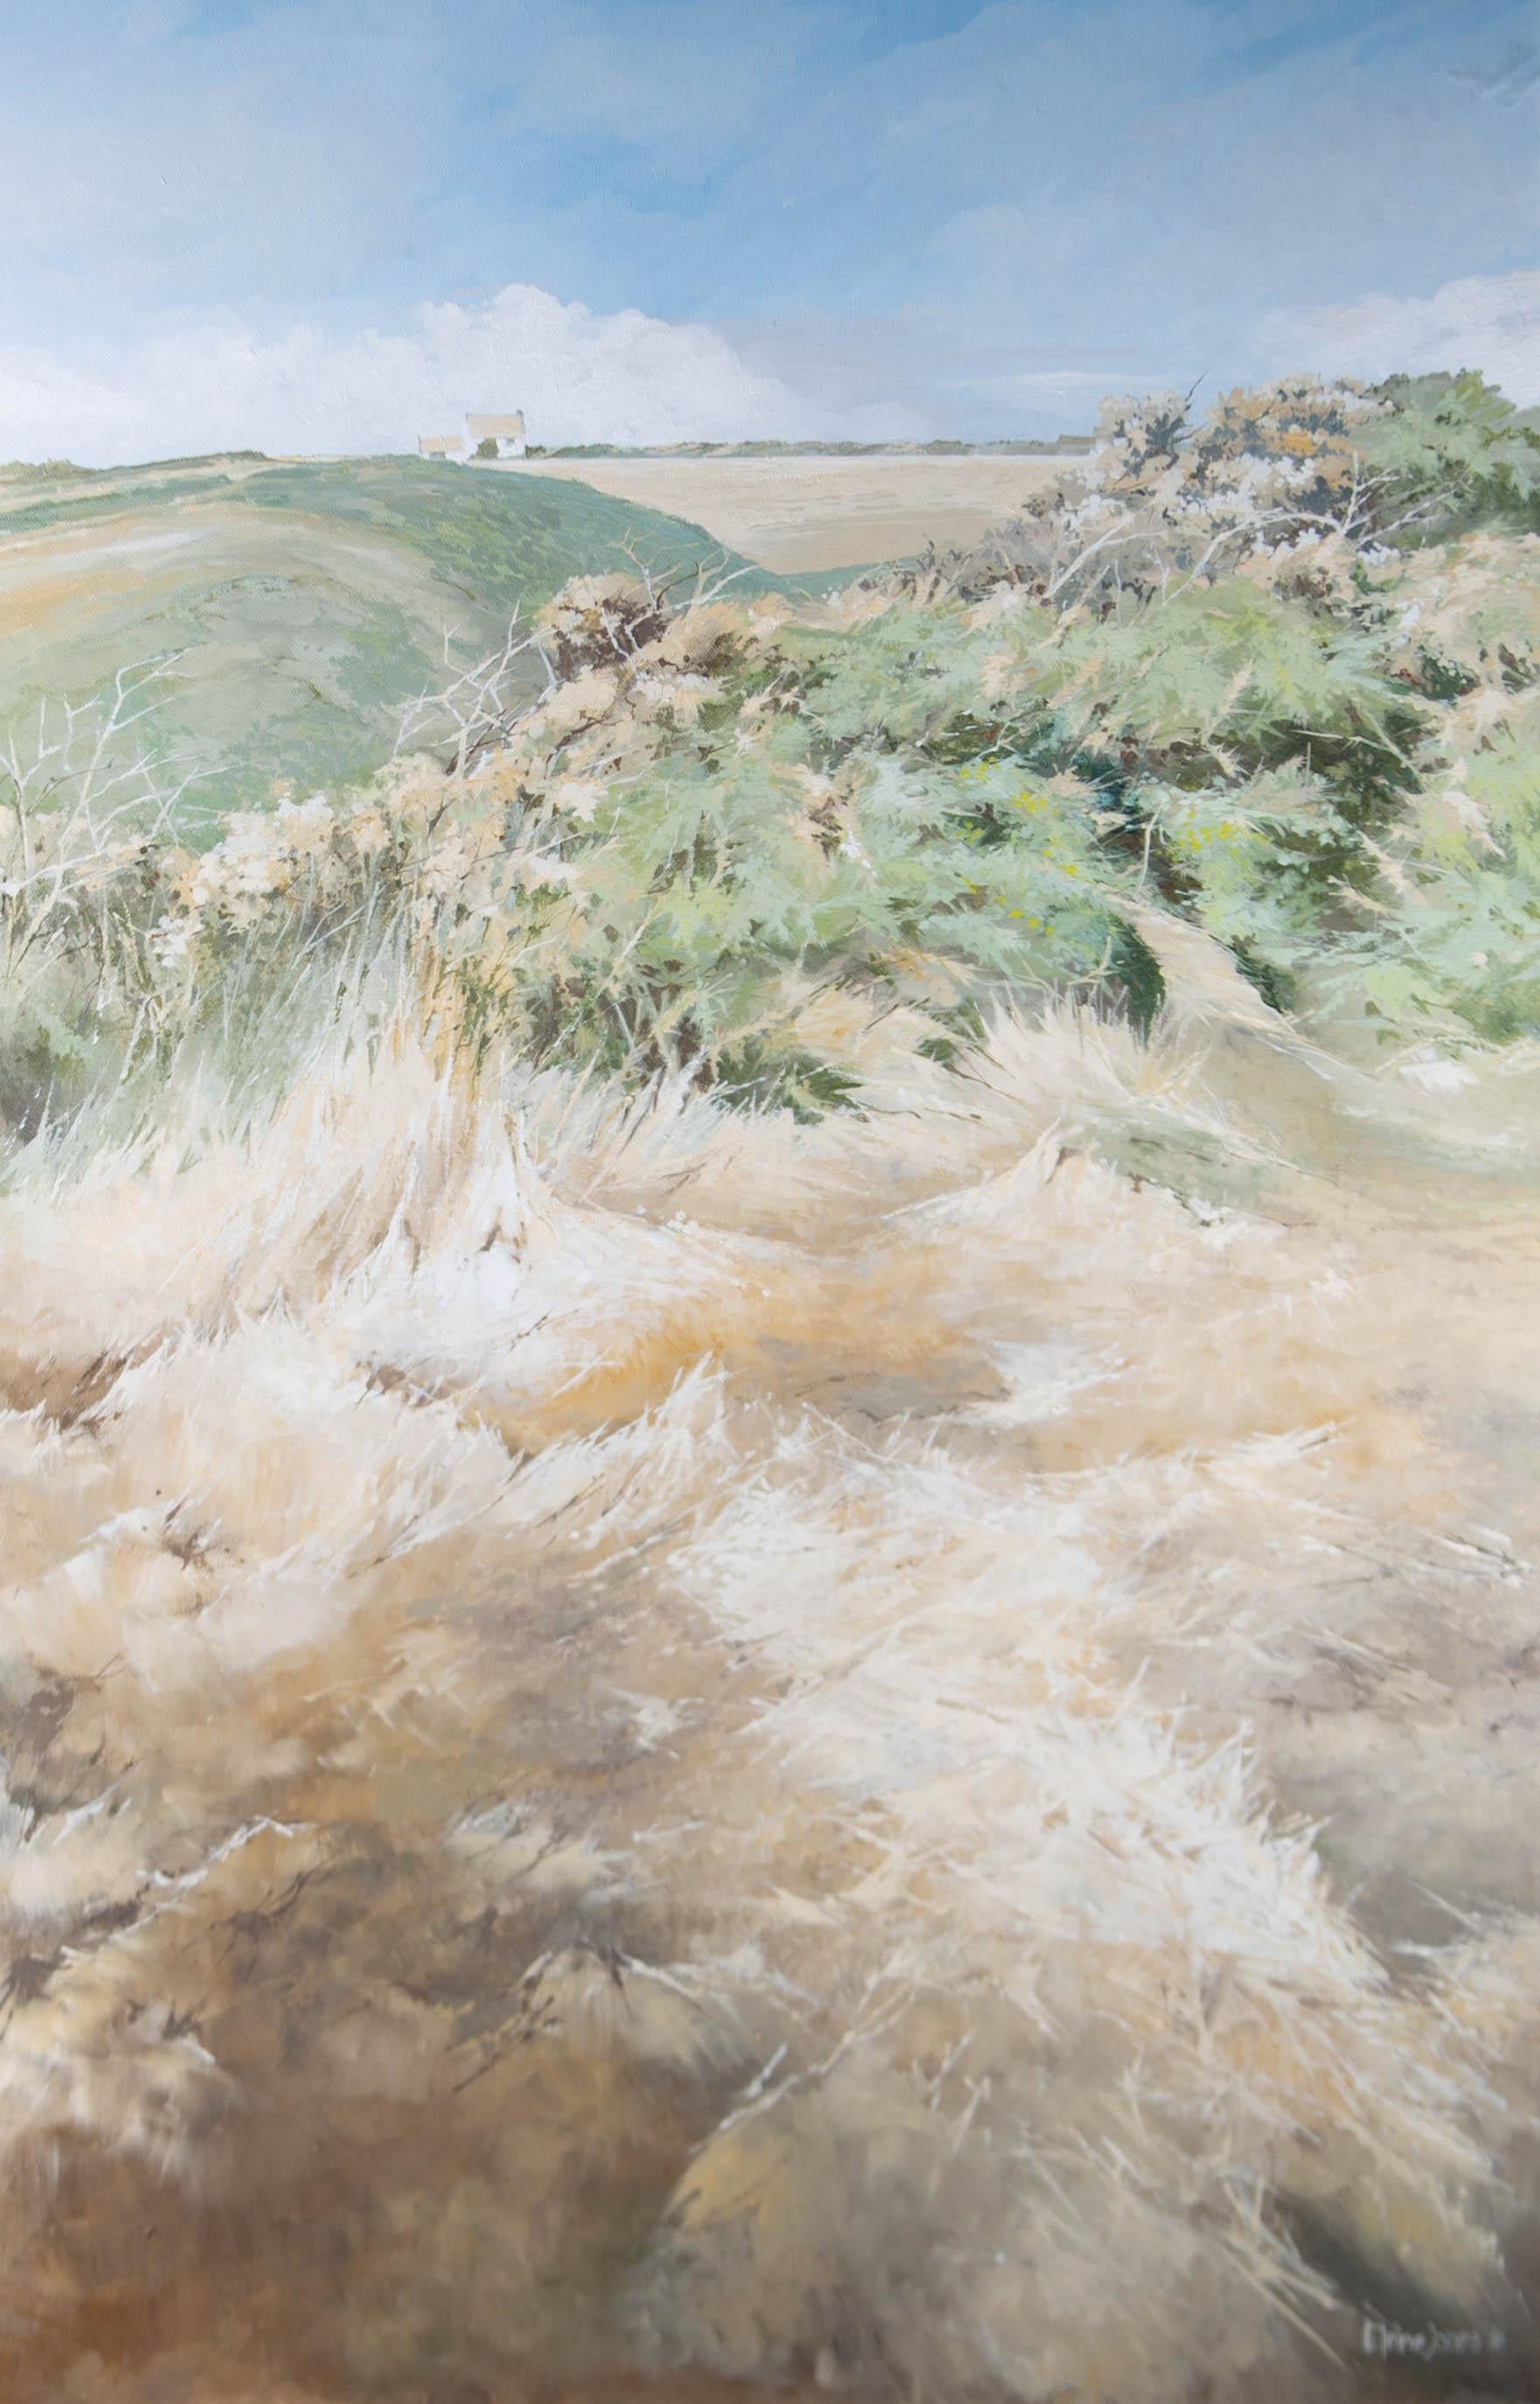 Twangs of nostalgia arise from this landscape depicted with muted tones and crisp brushwork. The artwork depicts a cottage hiding behind rolling hills of sandy foliage and grass in a peaceful manner. The artwork is signed and dated. Well presented